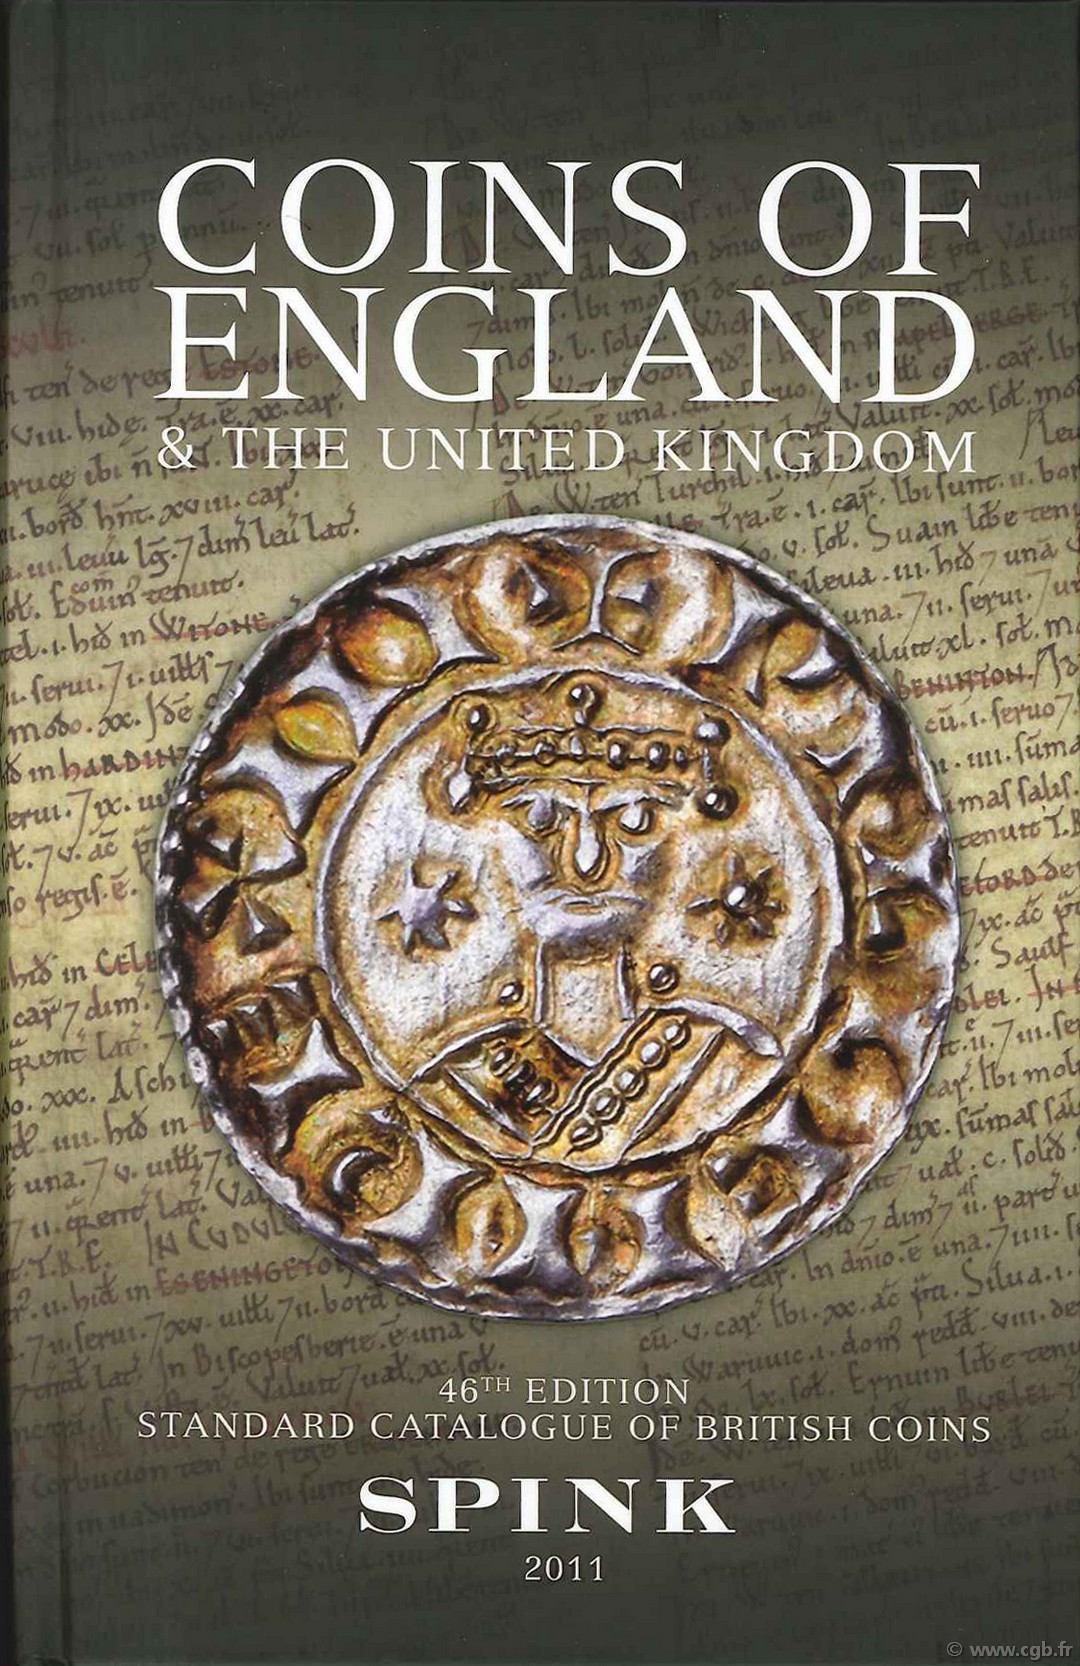 Coins of England and the United Kingdom, 46th edition - 2011 sous la direction de Philip Skingley